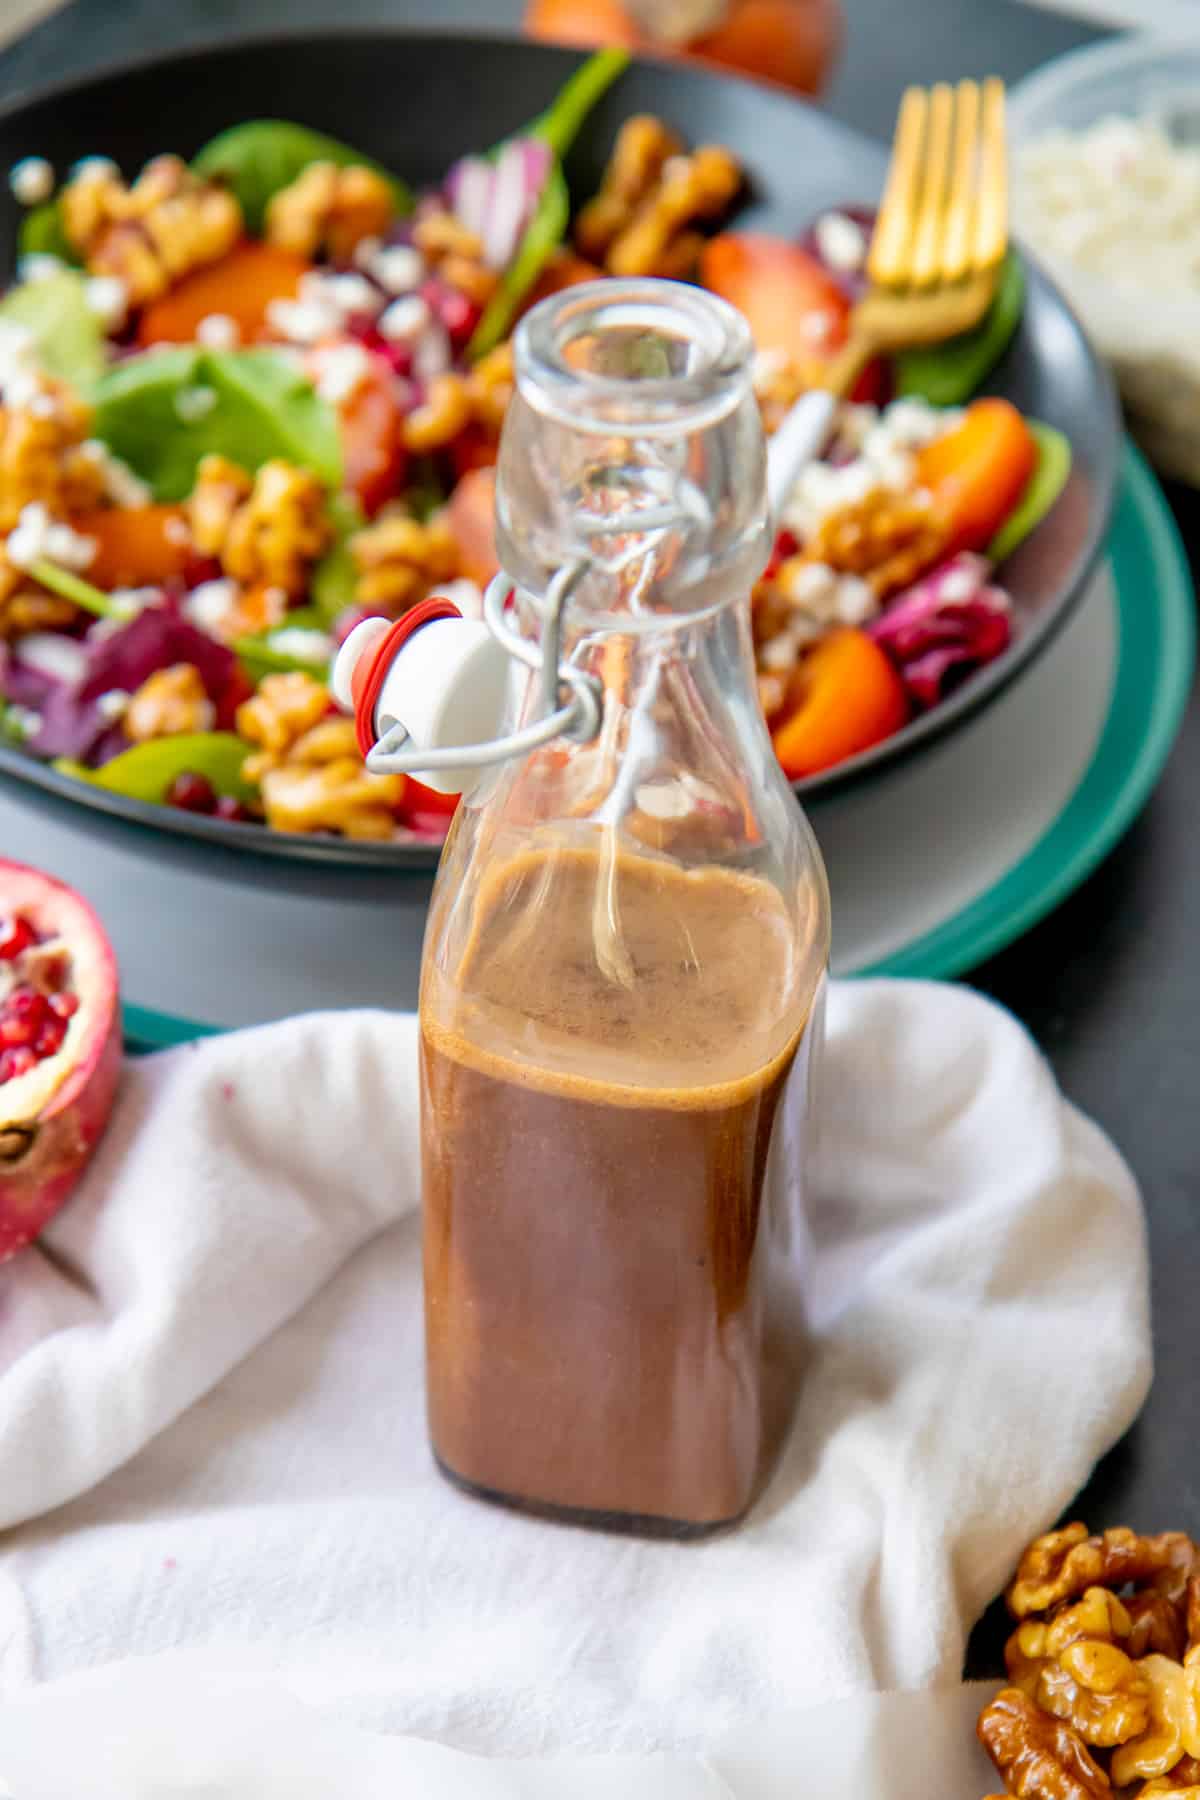 A bottle of maple vinaigrette sits in front of a bowl of salad.